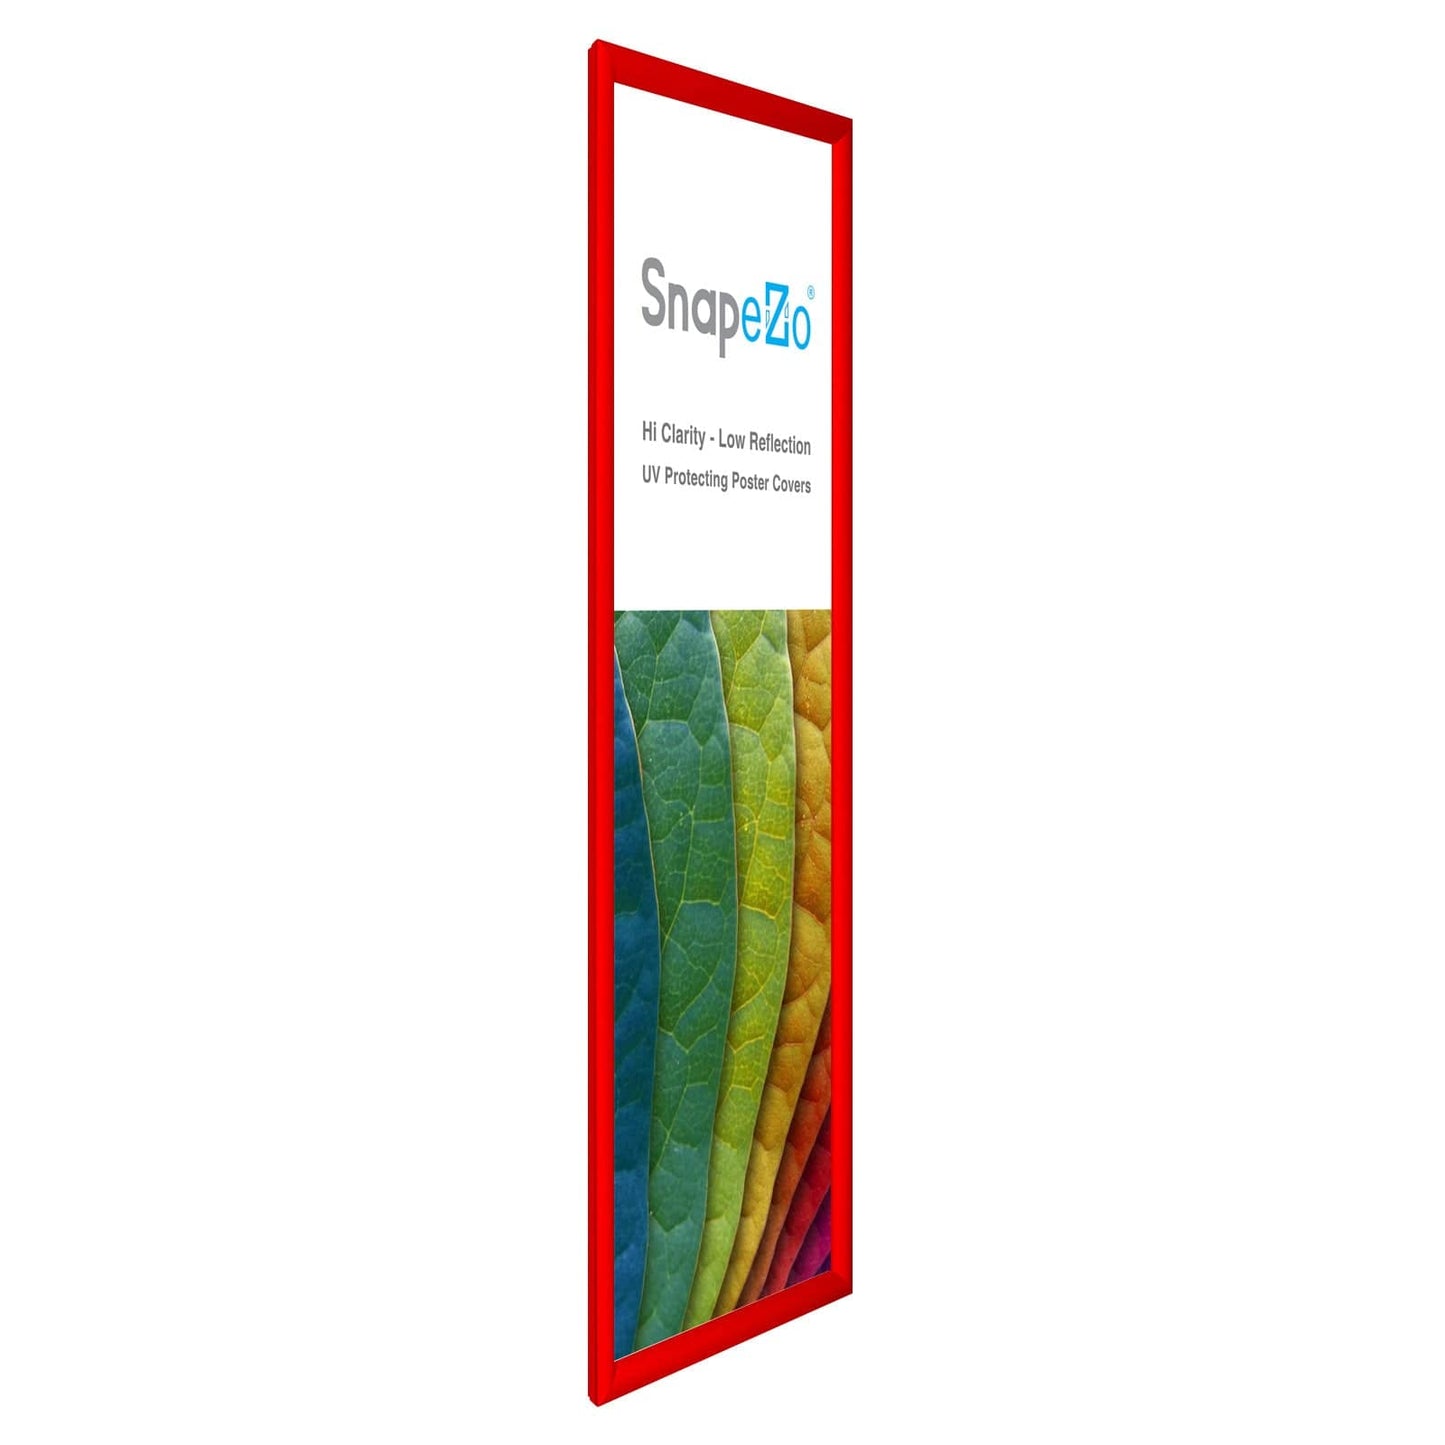 8x24 Red SnapeZo® Snap Frame - 1.2" Profile - Snap Frames Direct